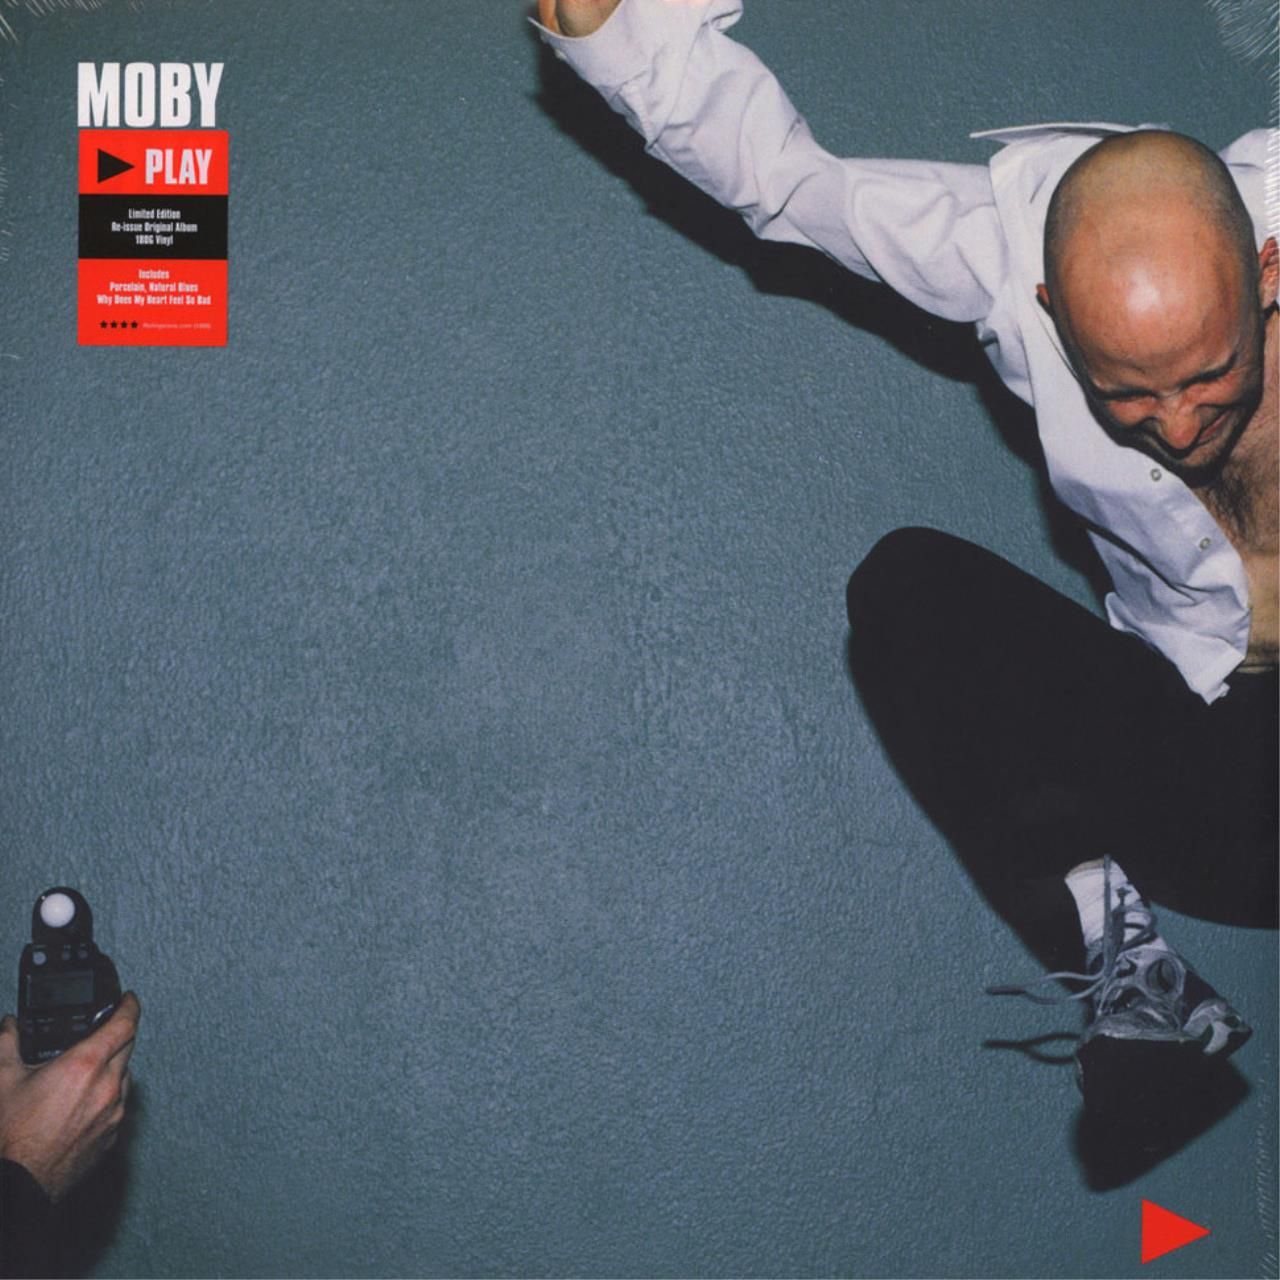 Moby play. Moby альбомы. Moby Play 1999. Moby 18.